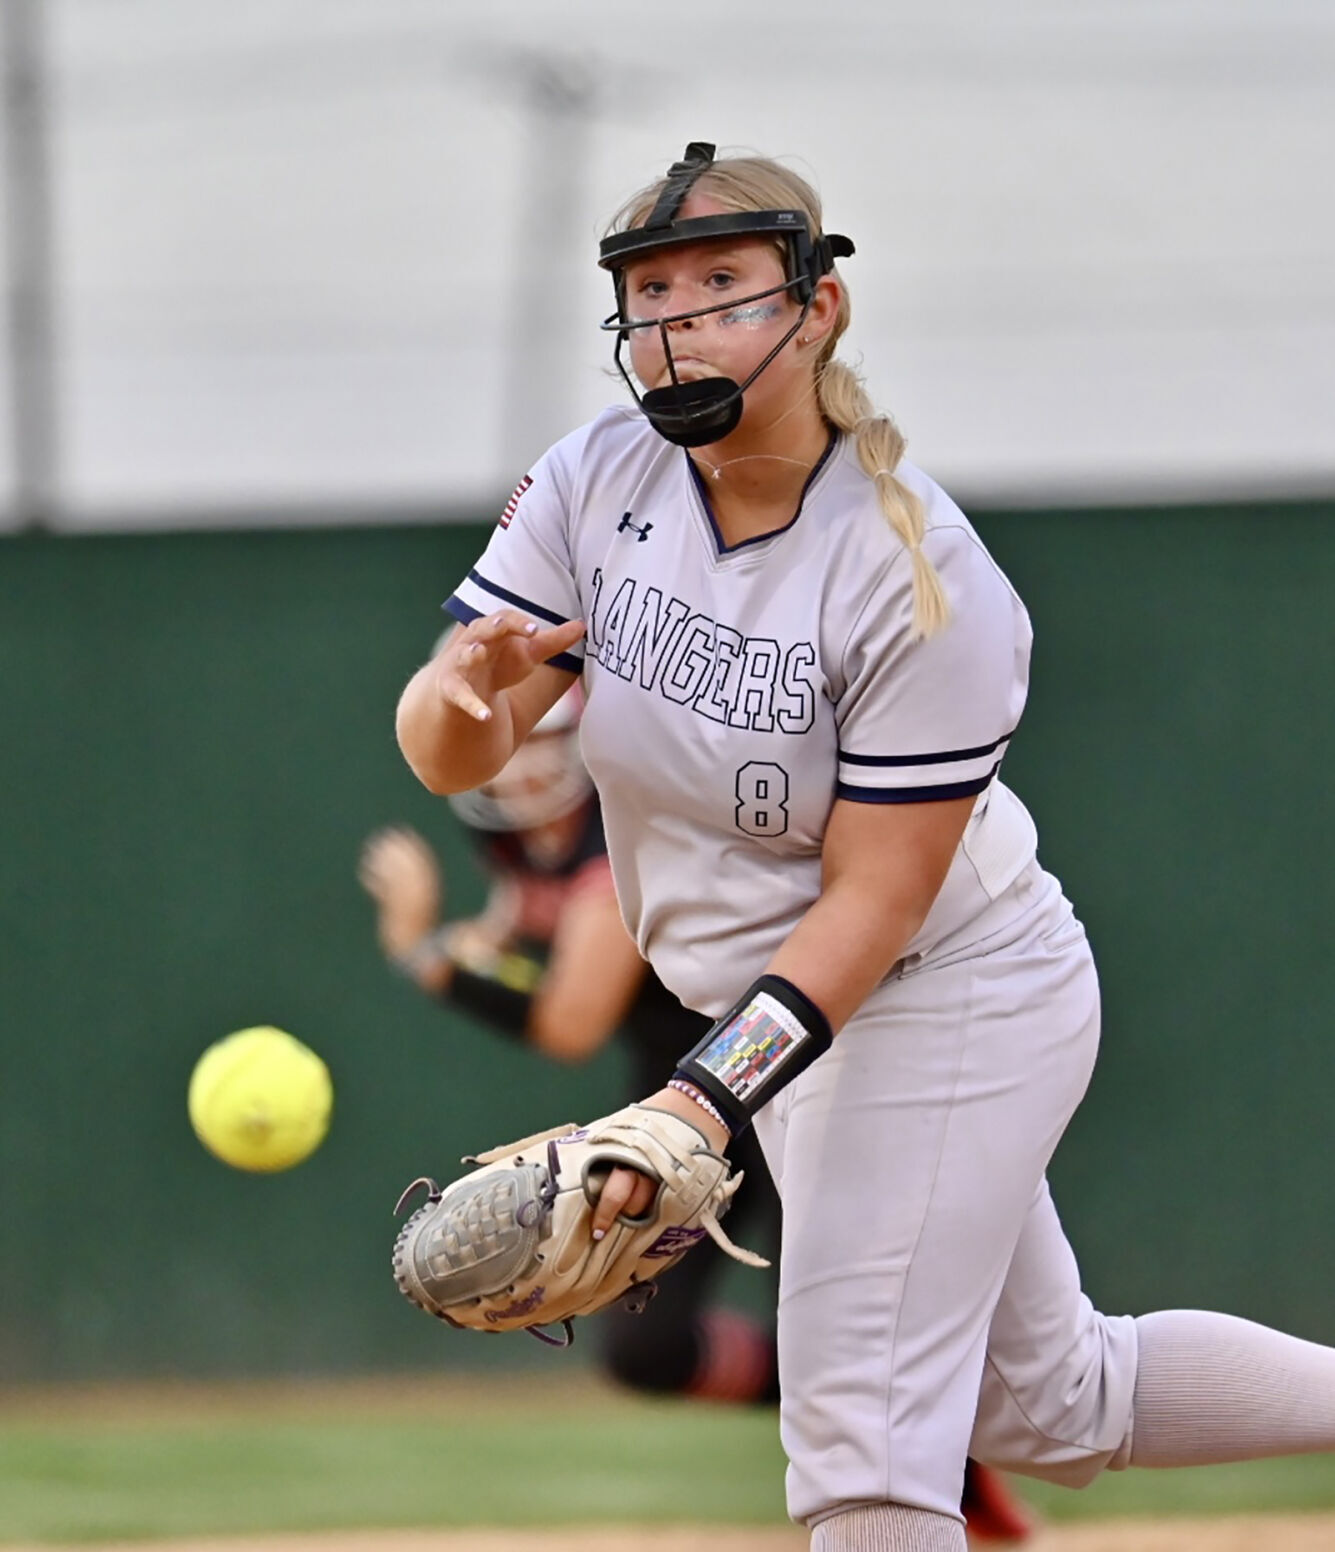 Smithson Valley captures district title, fends off Canyon 8-6